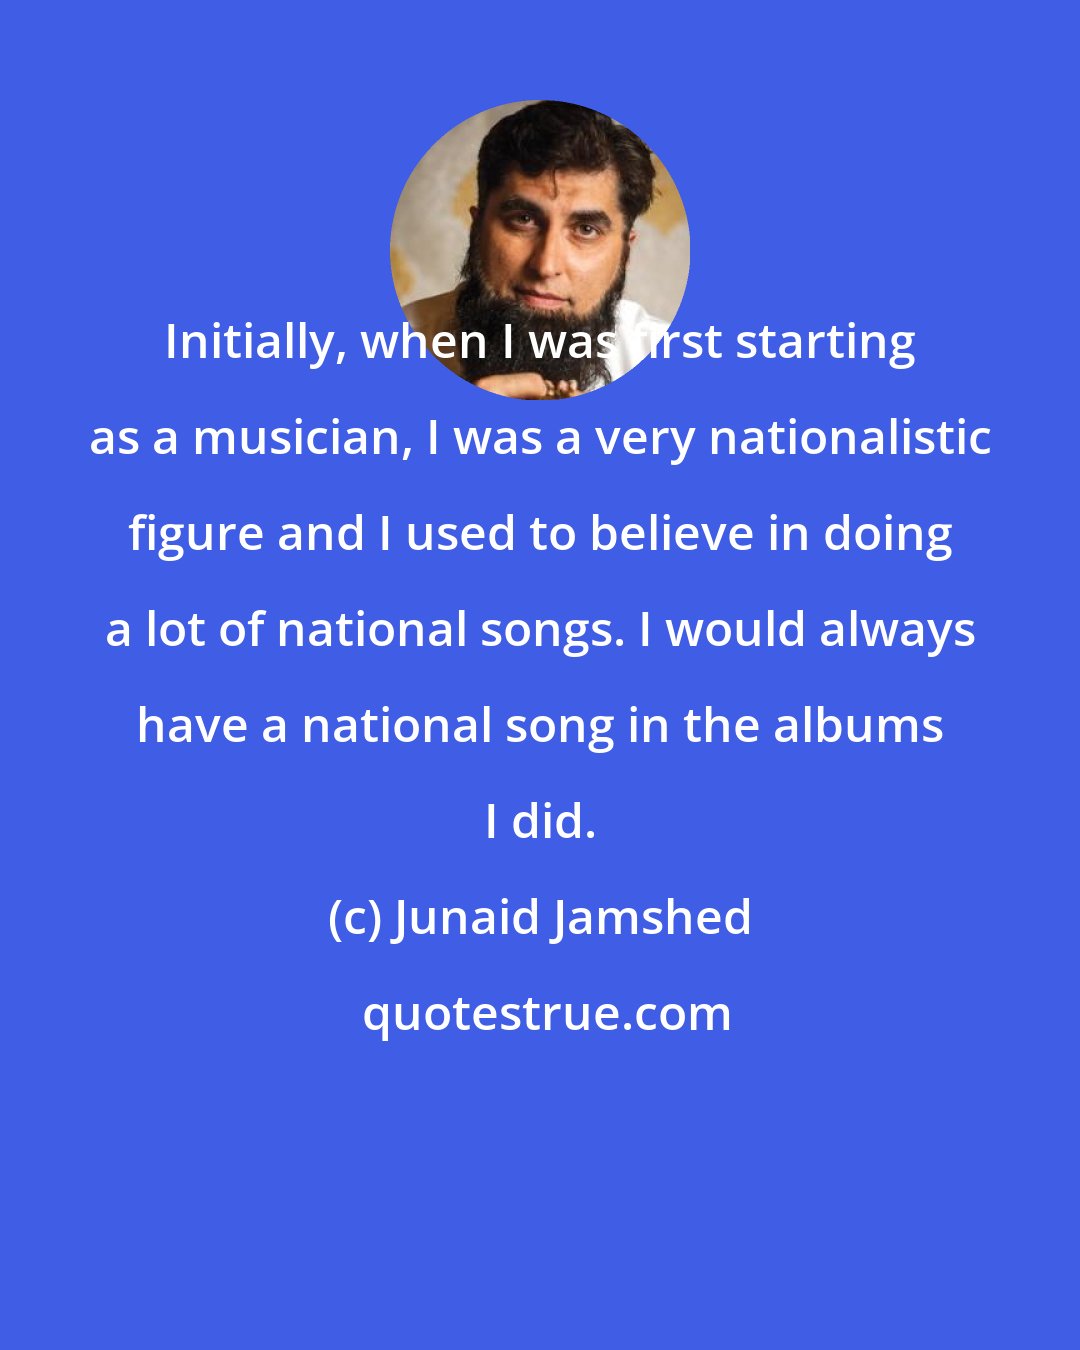 Junaid Jamshed: Initially, when I was first starting as a musician, I was a very nationalistic figure and I used to believe in doing a lot of national songs. I would always have a national song in the albums I did.